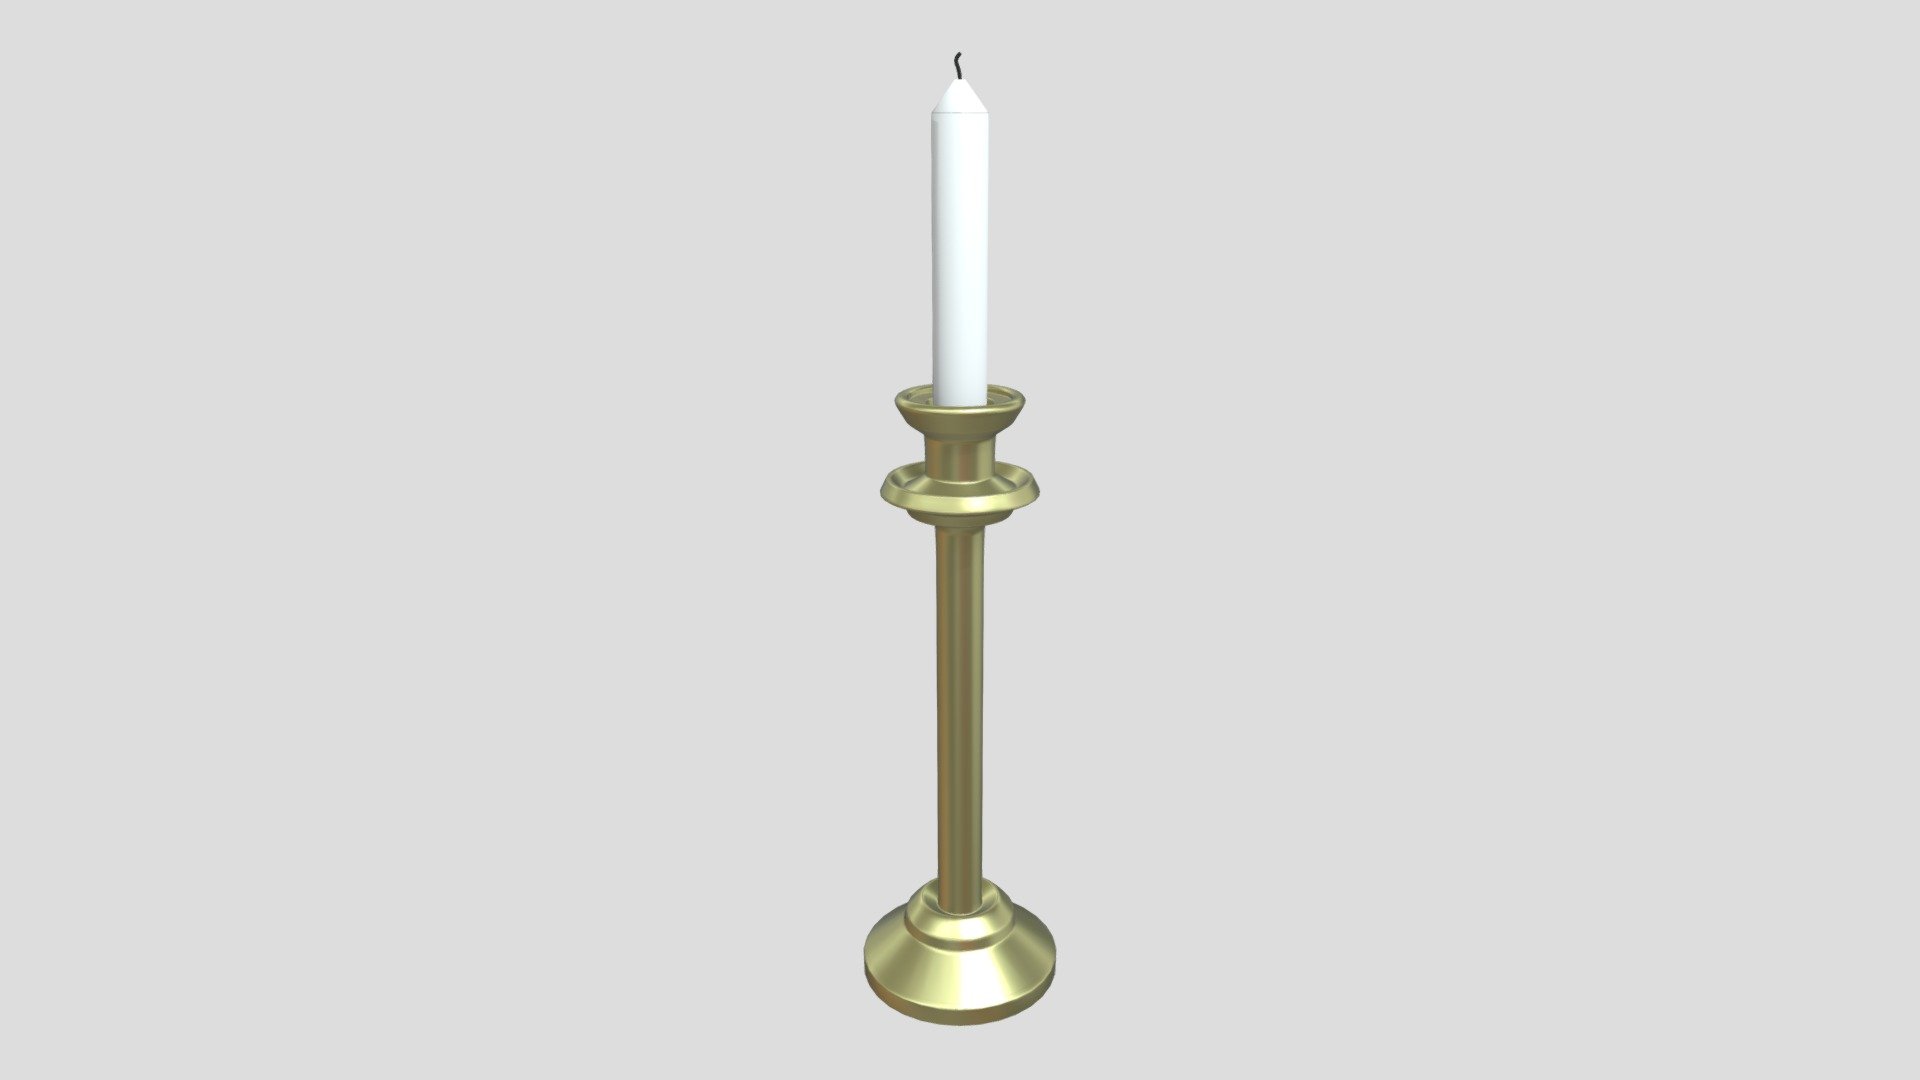 Church candle that was created using Blender. This is a candle that you could use for any church scene. For example, it could go on top of an altar or a podium. The candle is not limited to be used in church scenes, but it can be used in any scene that you feel it fits.

Features:


Model uses the metalness workflow and PBR textures in PNG format
Includes 1 model, 1 church candle
The model has been manually unwrapped to match its PBR textures
Native Blend file is included with pre-applied textures
Blend file has objects and cameras grouped accordingly and easy to follow
Model has been exported in 3 file formats (FBX, OBJ, DAE/Collada)
All files have been zipped into one archive with an easy to follow hierarchy

Included Textures:


AO, Diffuse, Roughness, Gloss, Metallic, Normal
UVLayout

The source file that is uploaded is for demonstration use and is uploaded in FBX format. In the additional file you will find all model exports and the textures that go along with them 3d model